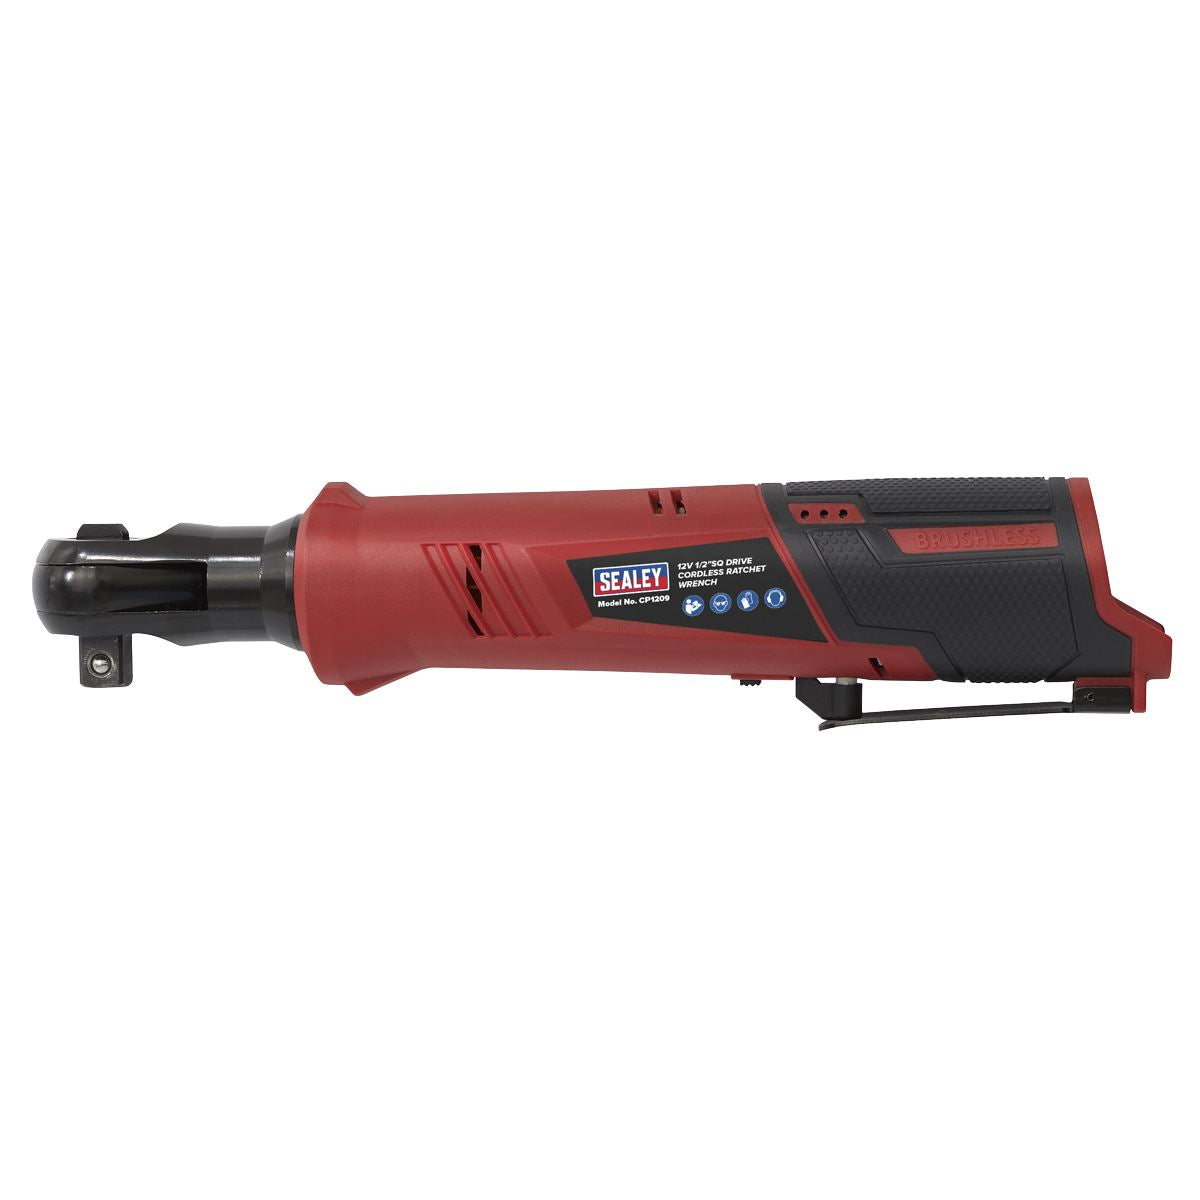 Sealey Cordless Ratchet Wrench 1/2"Sq Drive 12V SV12 Series - Body Only